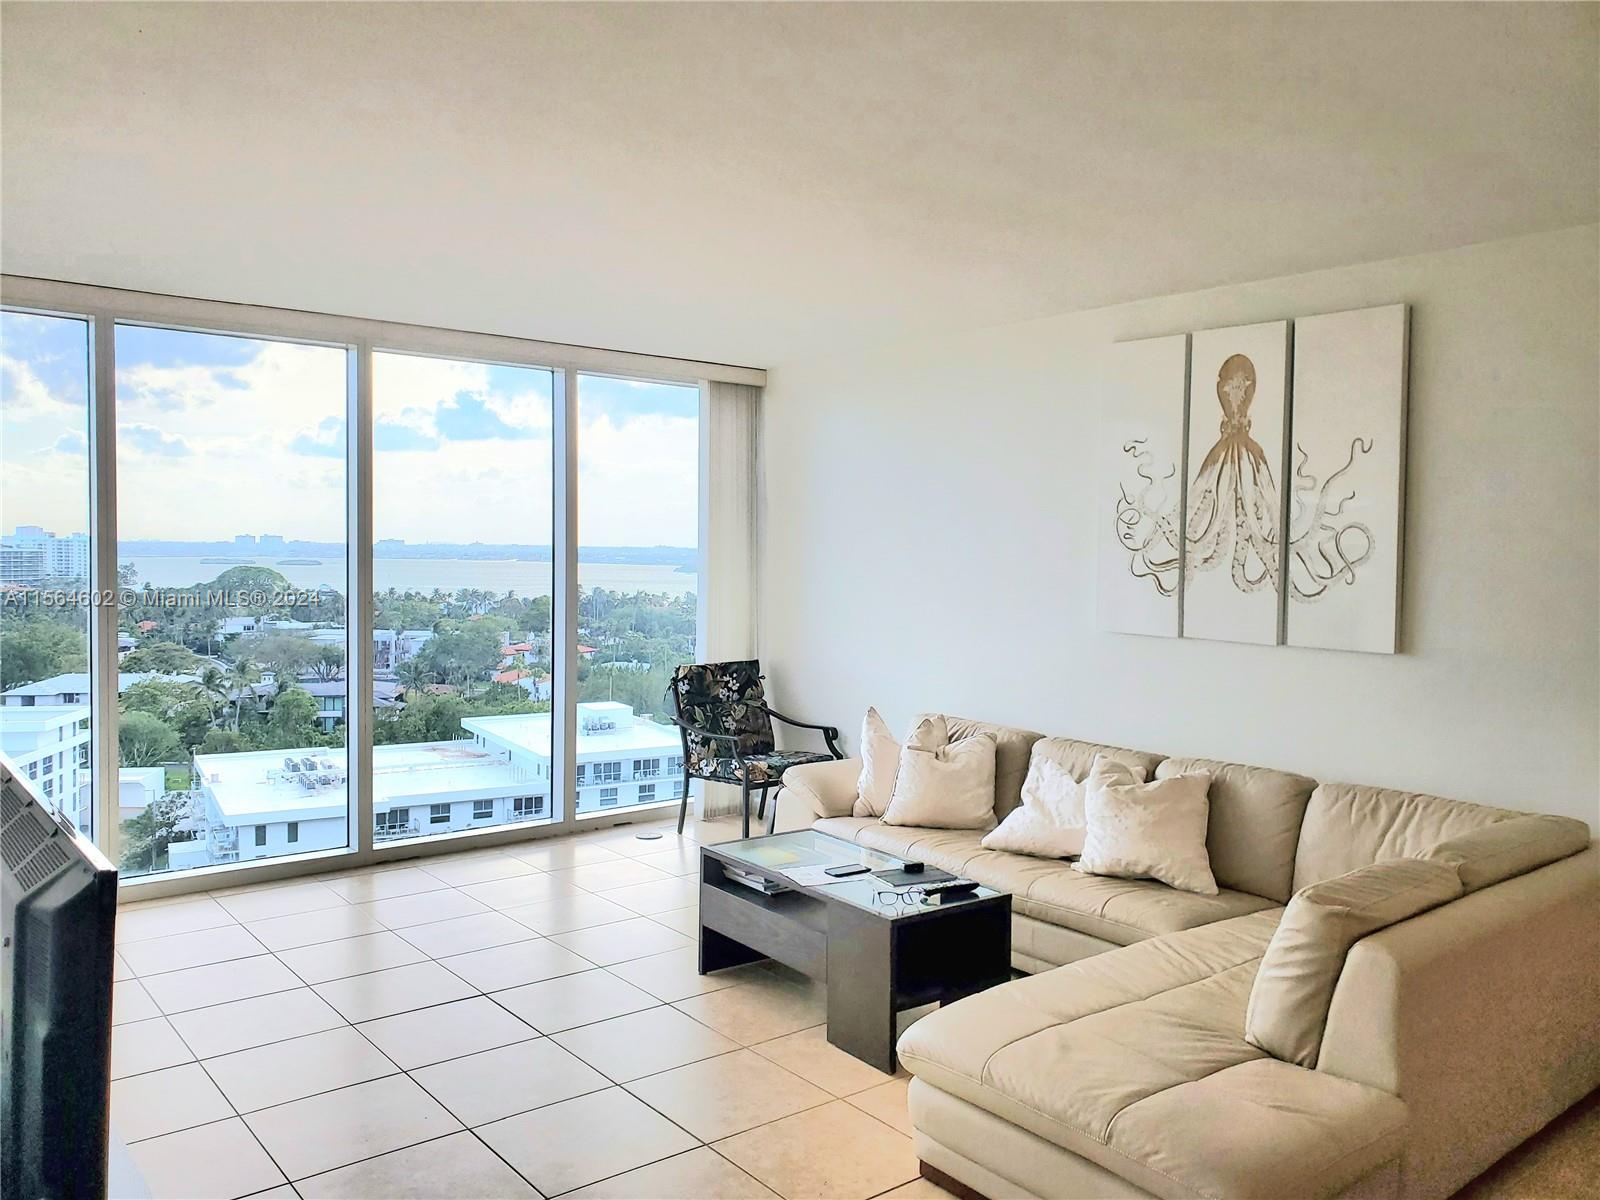 Enjoy oceanfront living and amazing sunsets from this 1/1.5 bathroom apartment. Harbour House is located in the heart of Bal Harbour. Upgraded unit with tile floors throughout and just installed brand new appliances. Building amenities include state of art gym, huge pool, jacuzzi, steam room, sauna, media lounge, café, club room, tennis & pool tables, plus beach service with umbrellas and chairs. Also, 24 hours valet, front desk and security. Walking distance to Bal Harbour shops. Easy to show